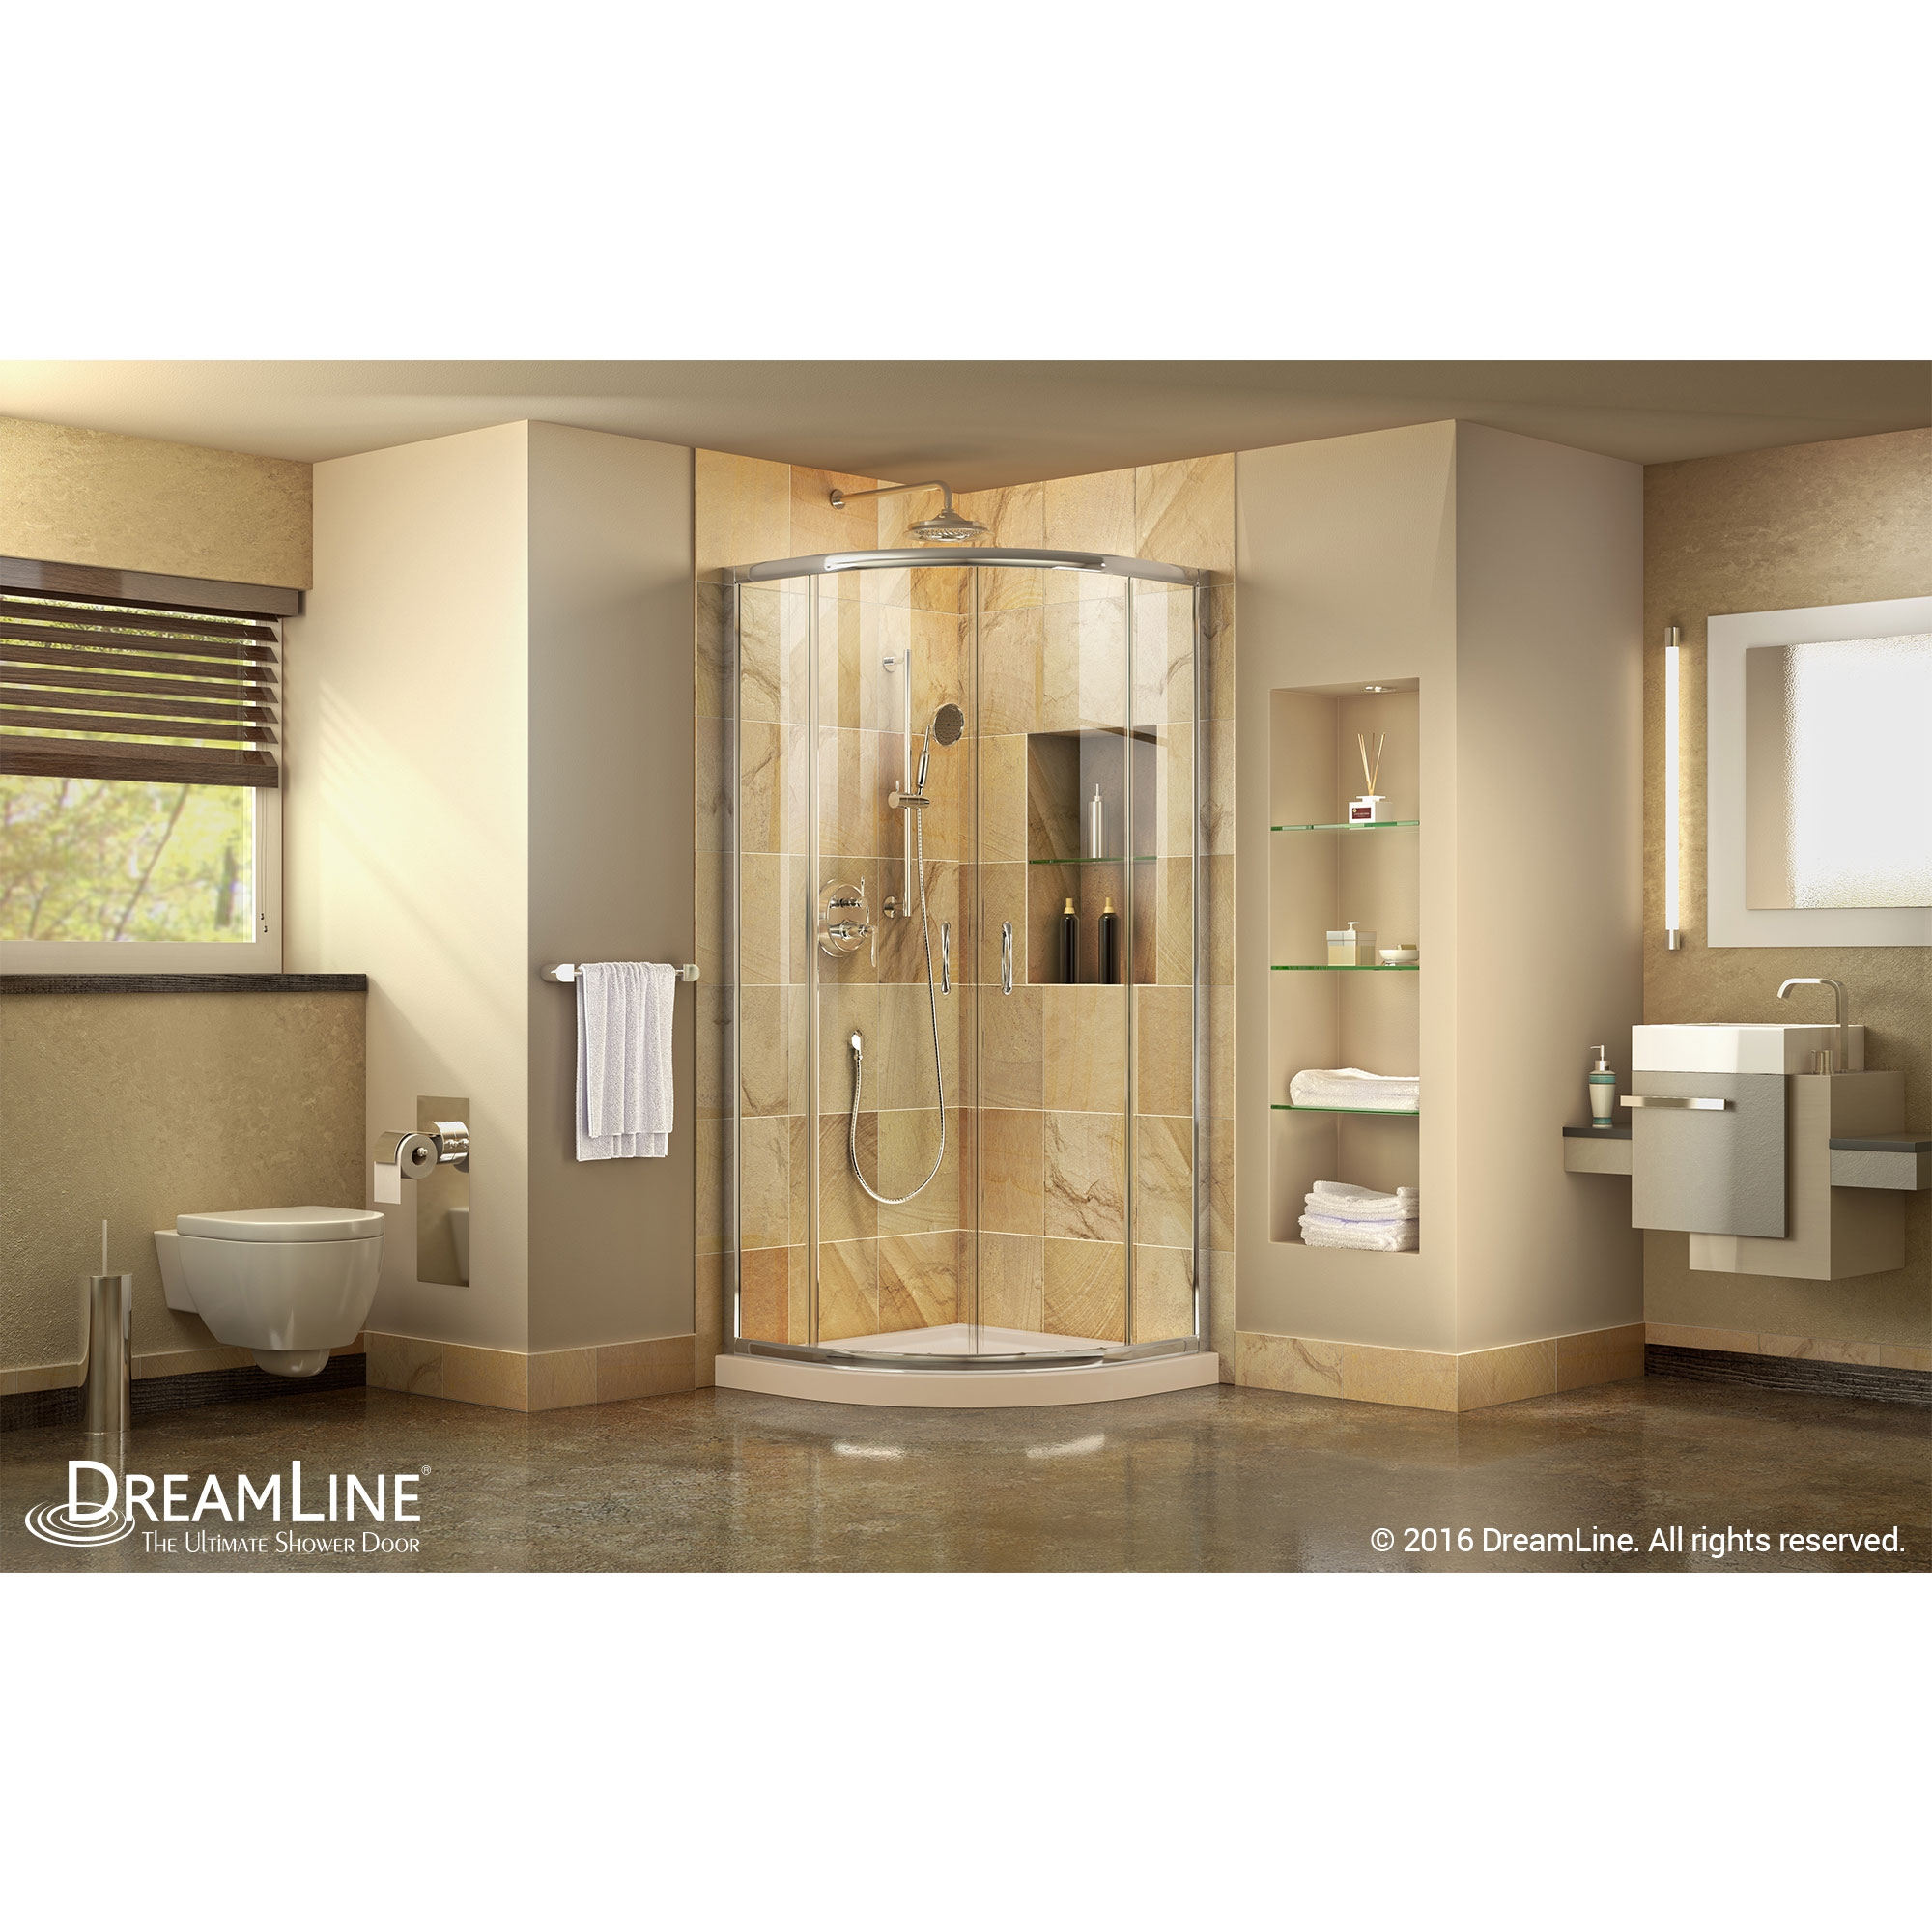 DreamLine Prime 33 in. D x 33 in. W x 74 3/4 in. H Clear Sliding Shower Enclosure in Chrome with Corner Drain Biscuit Base Kit